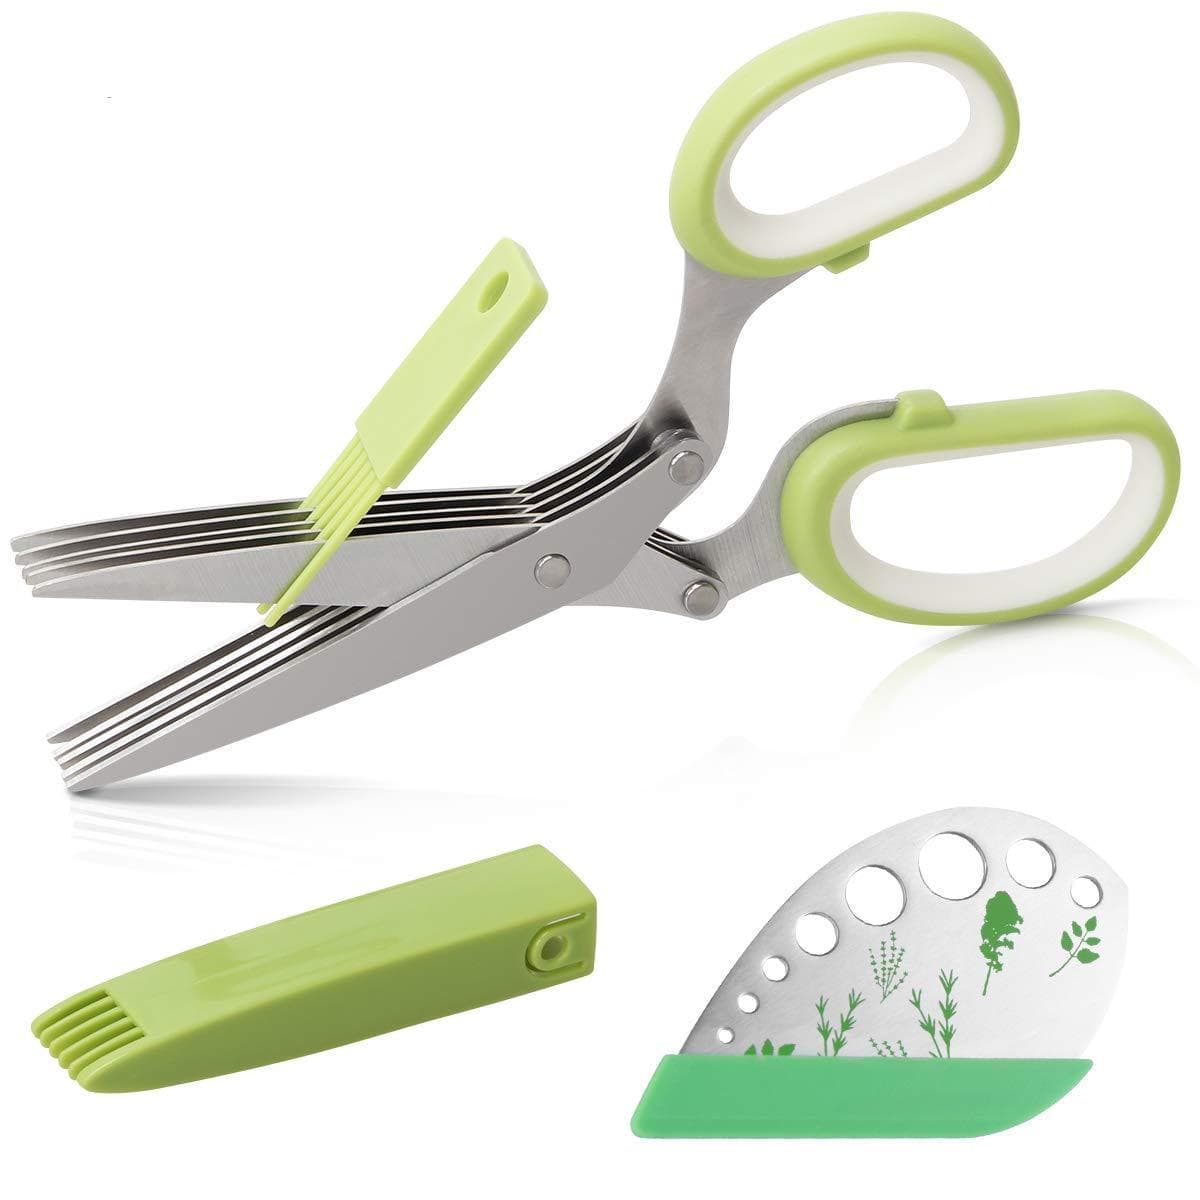 Herb Scissors, Kitchen Herb Shears Cutter with 5 Blades and Cover